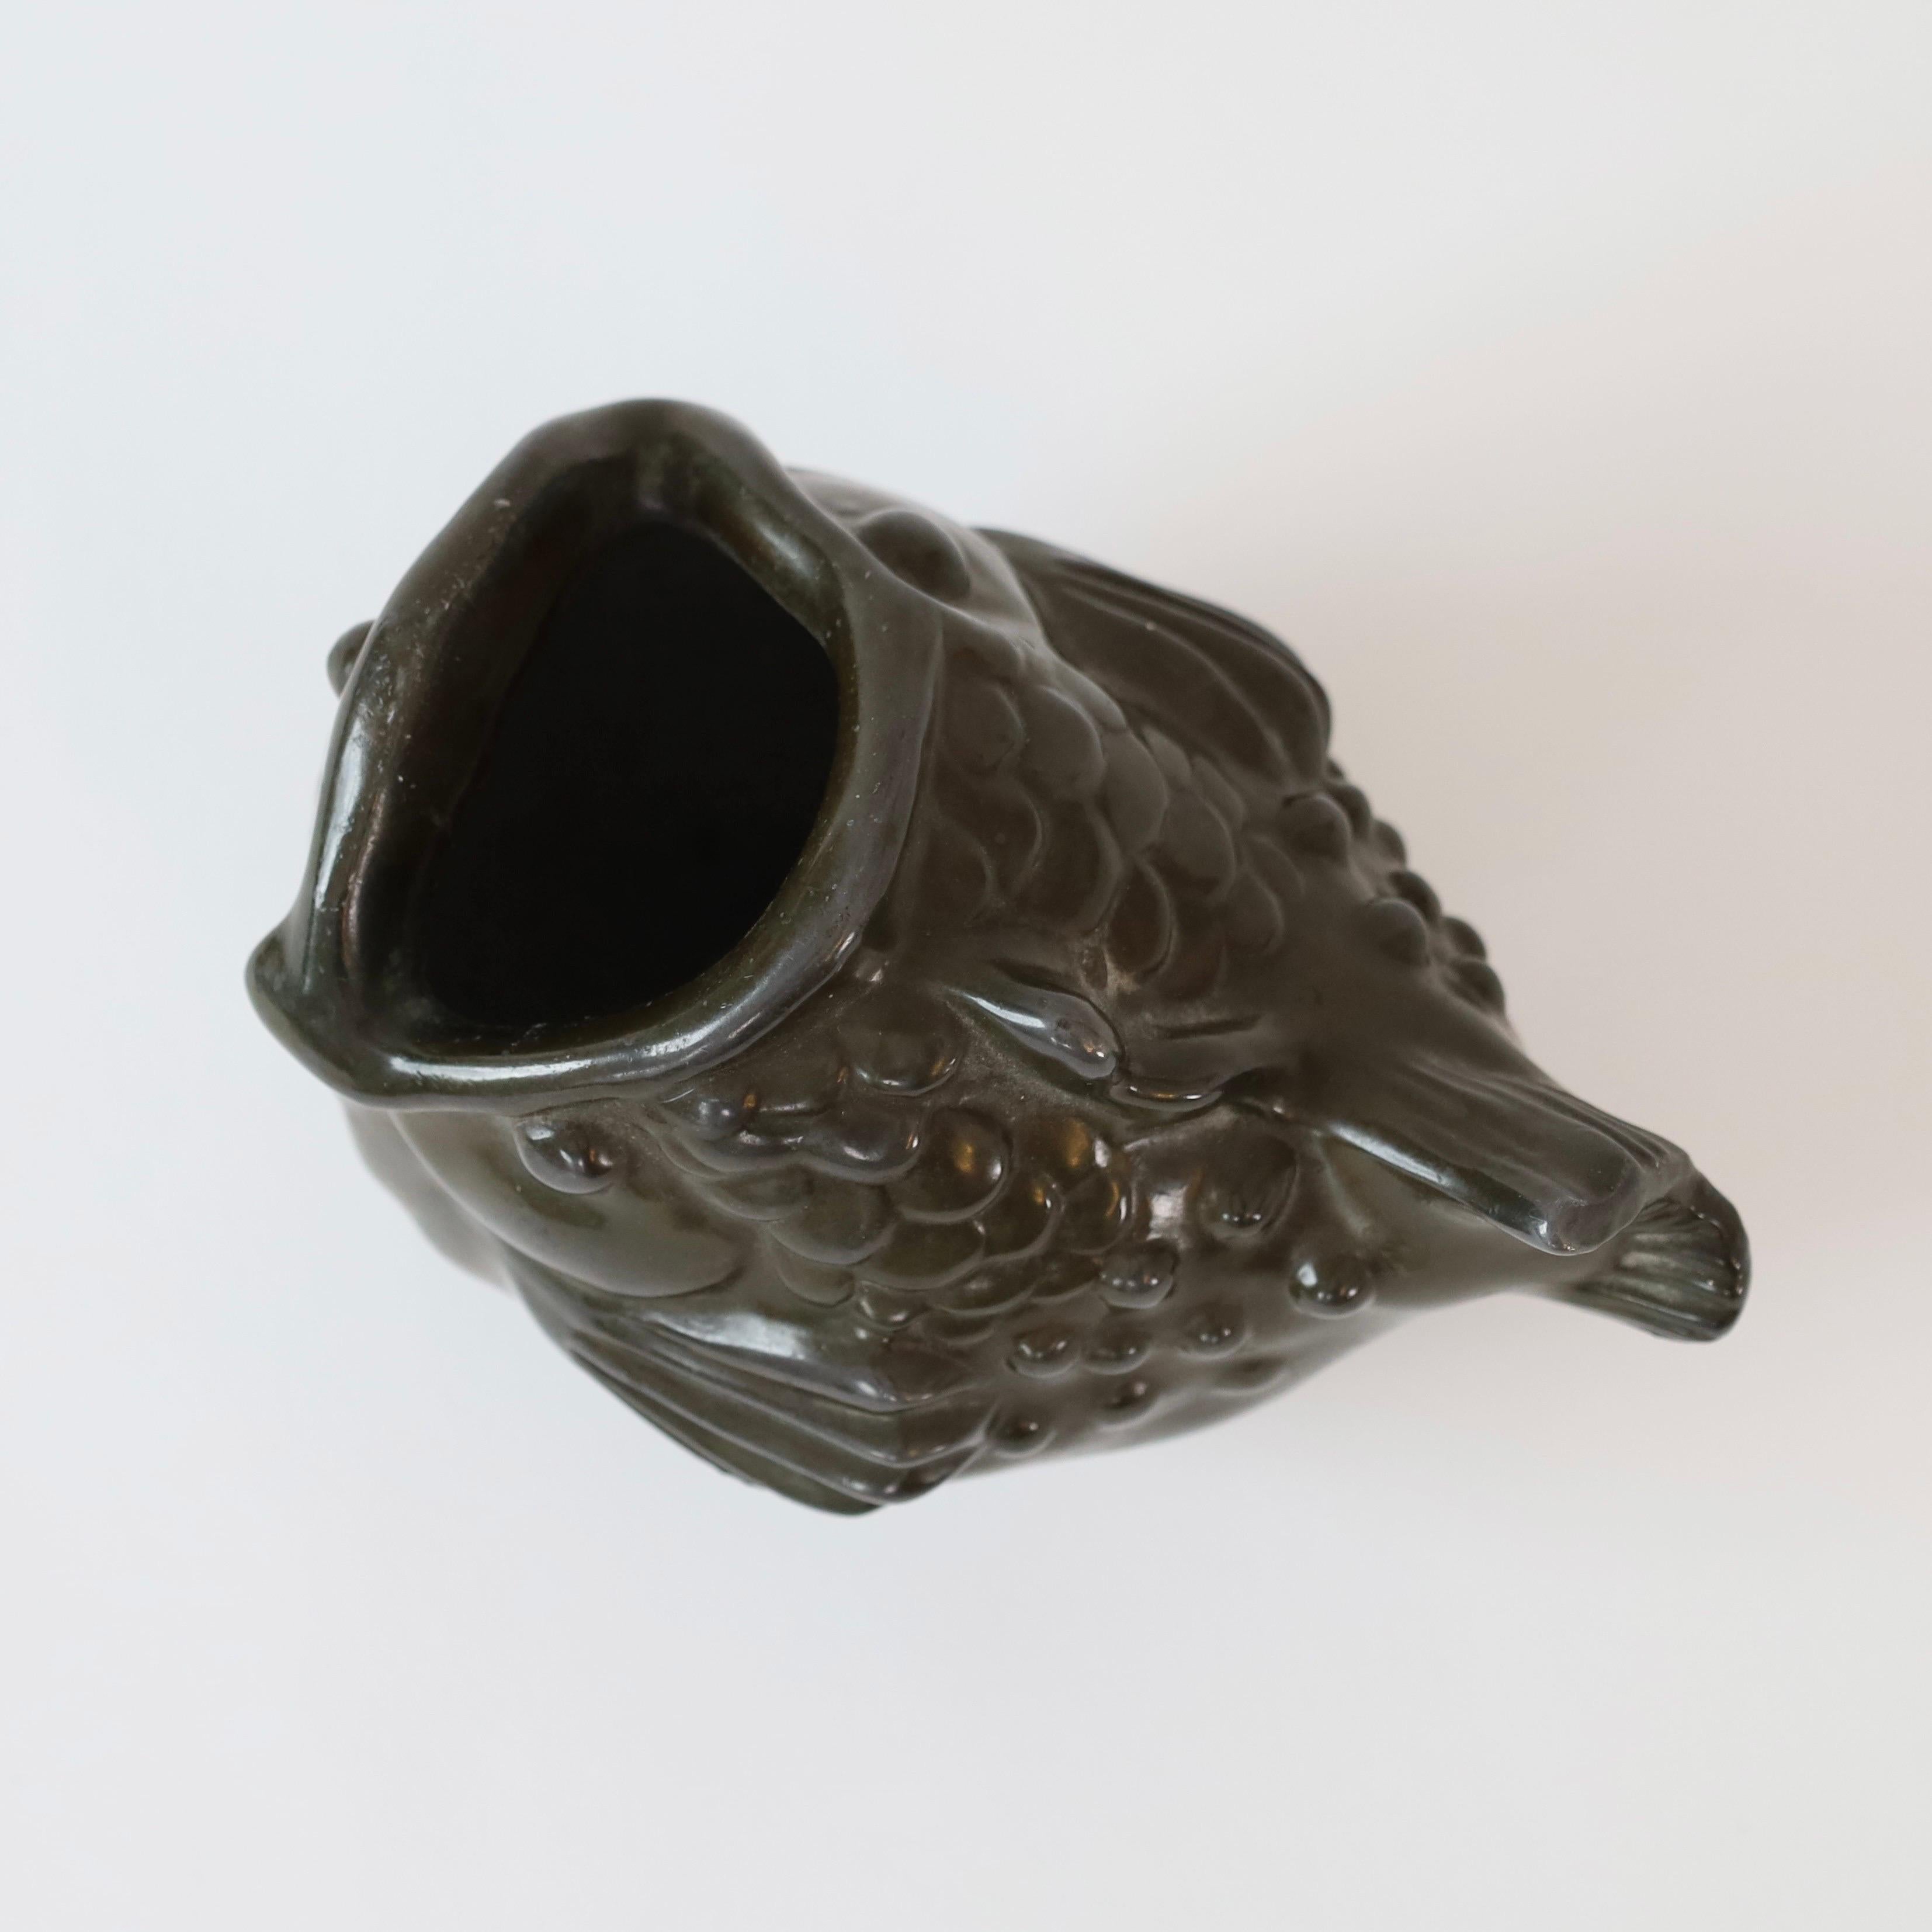 Fish-shaped Art Deco Vase by Just Andersen, 1930s, Denmark For Sale 3